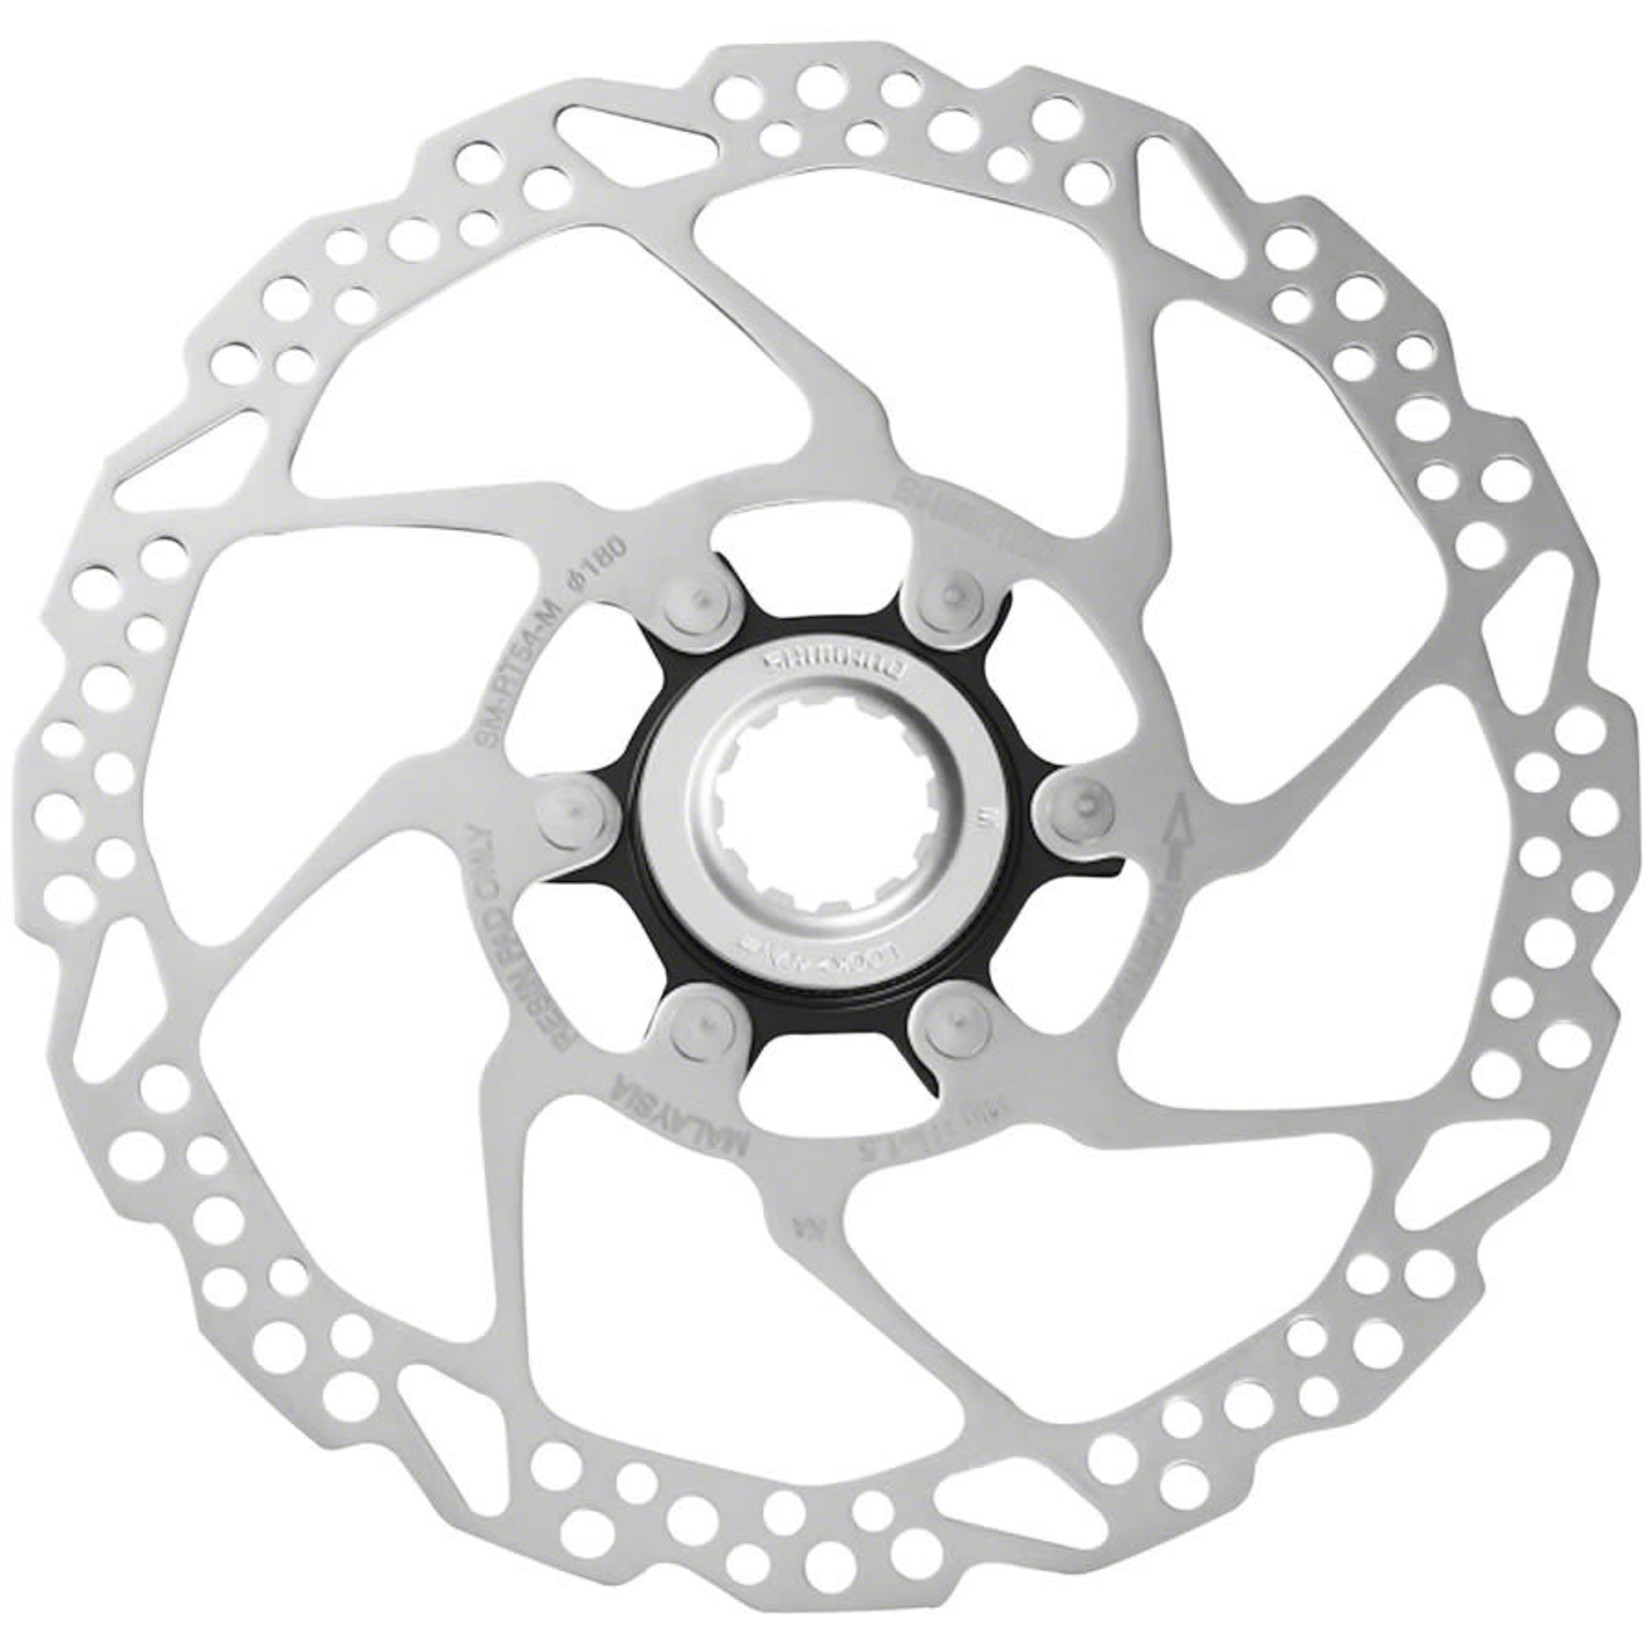 Shimano Deore SM-RT54-M Disc Brake Rotor - 180mm Center Lock For Resin Pads Only External Lockring Silver